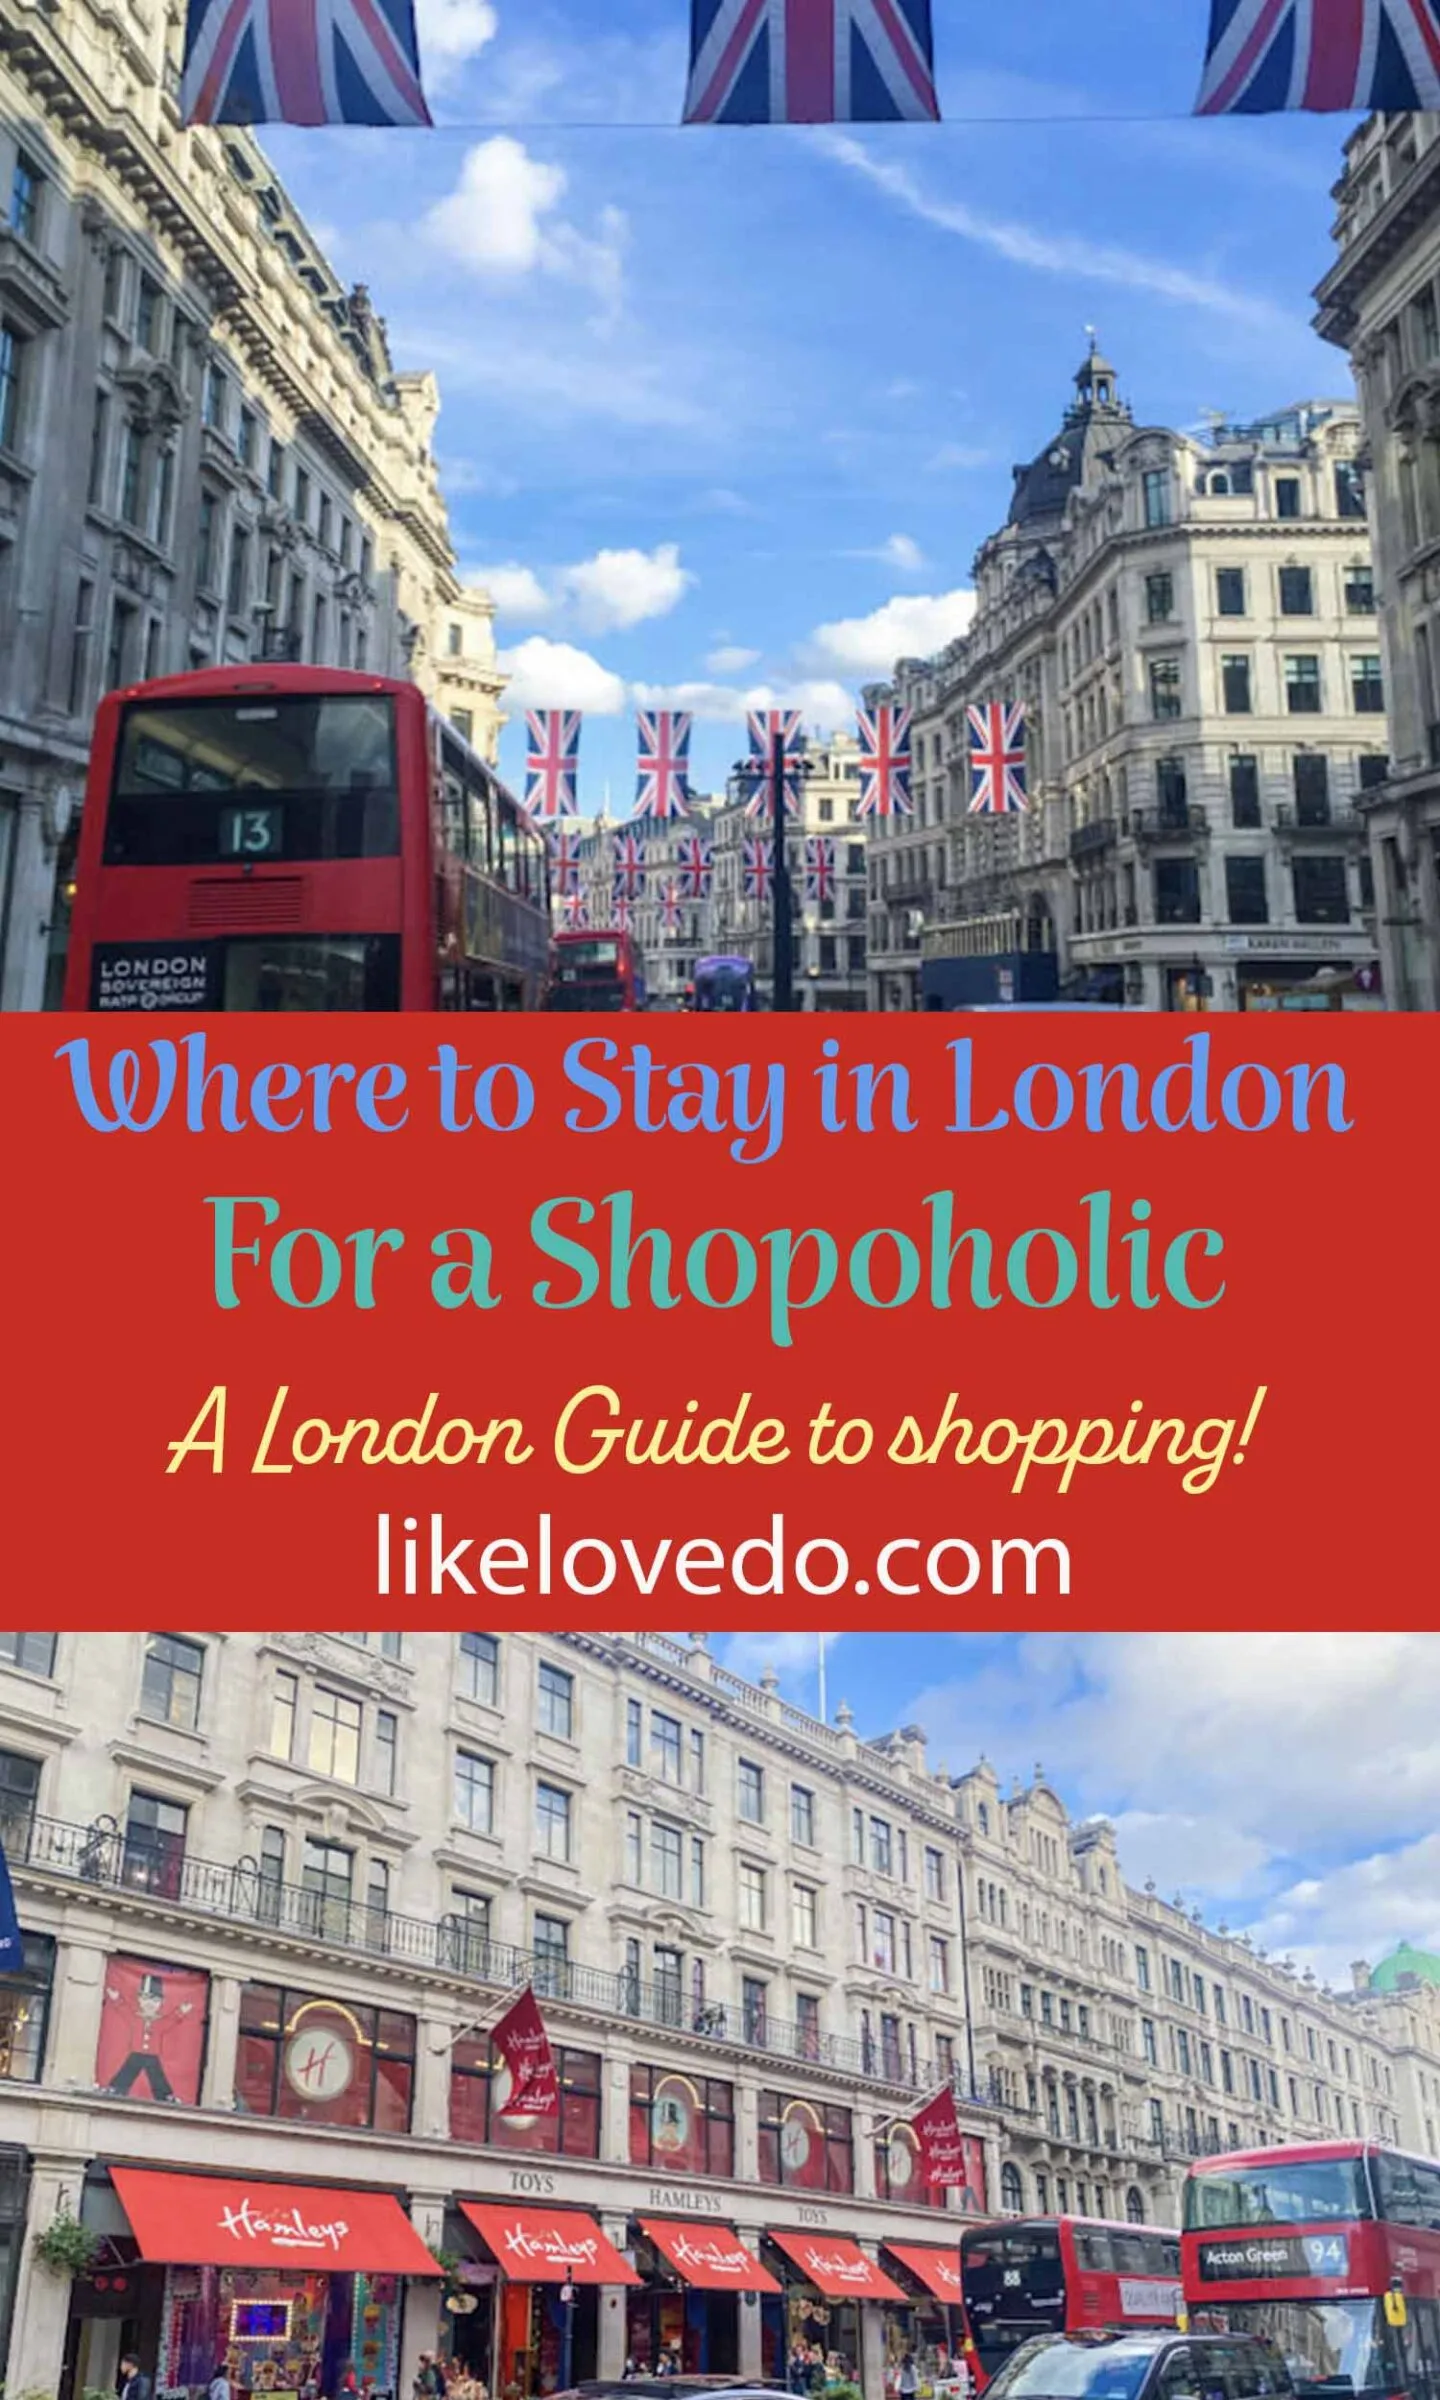 Everything you need to know about the best shops in London and where to Stay in London for a shopaholic Pin image